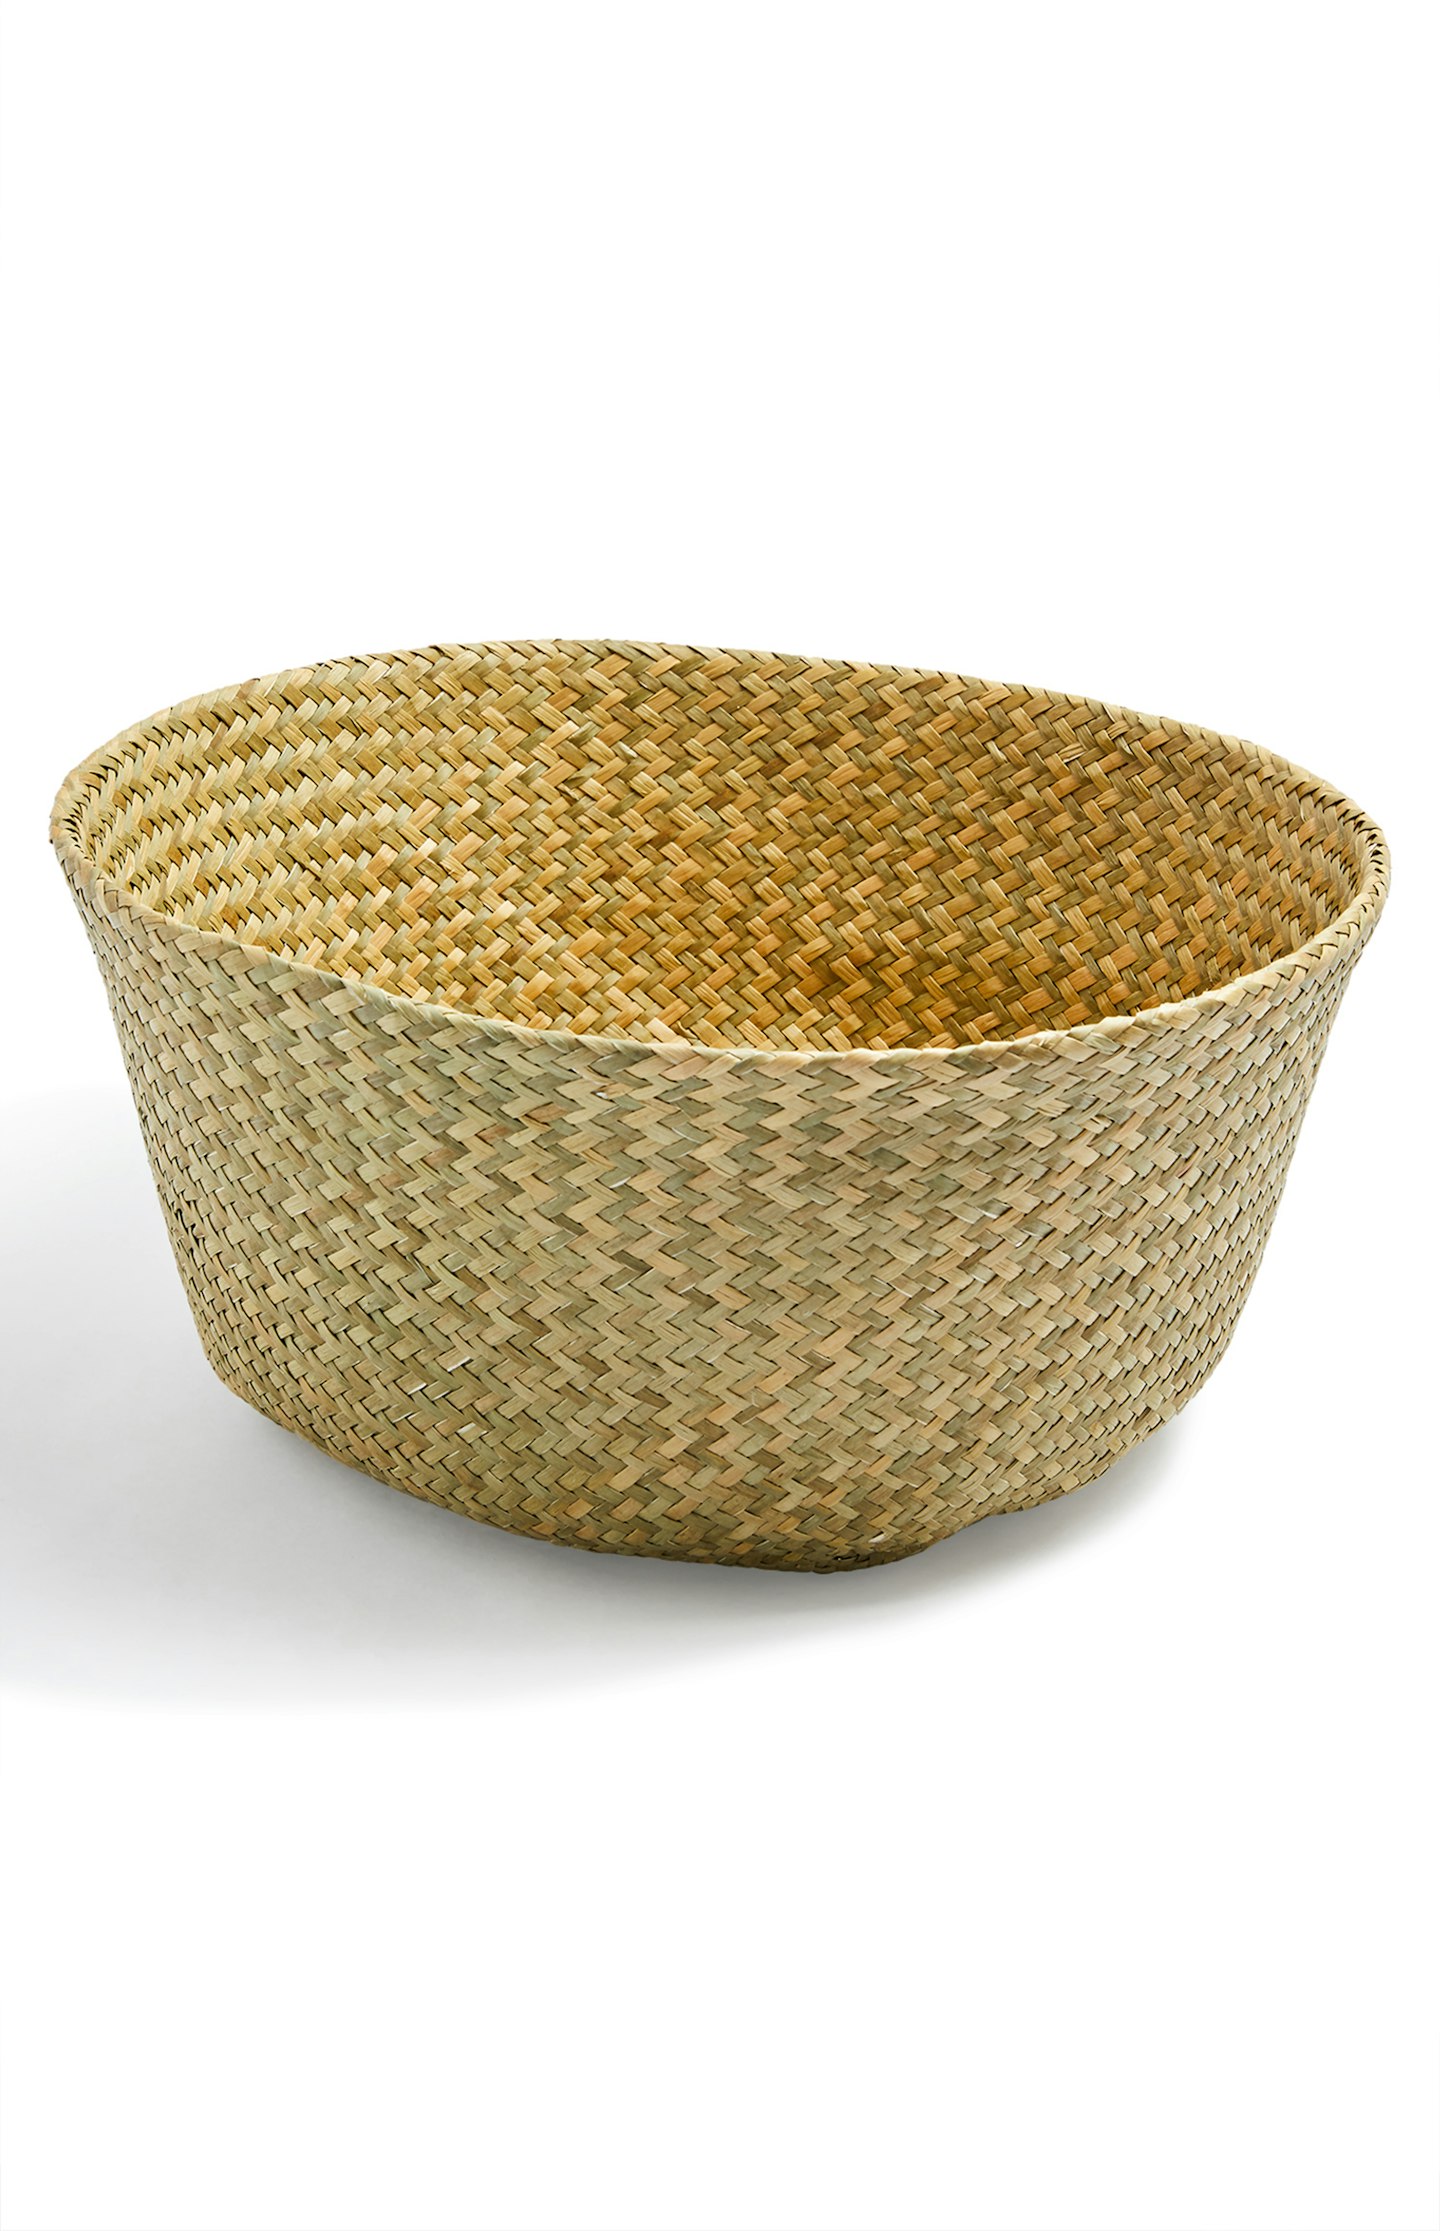 Primark, Large Woven Collapsible Basket, £8